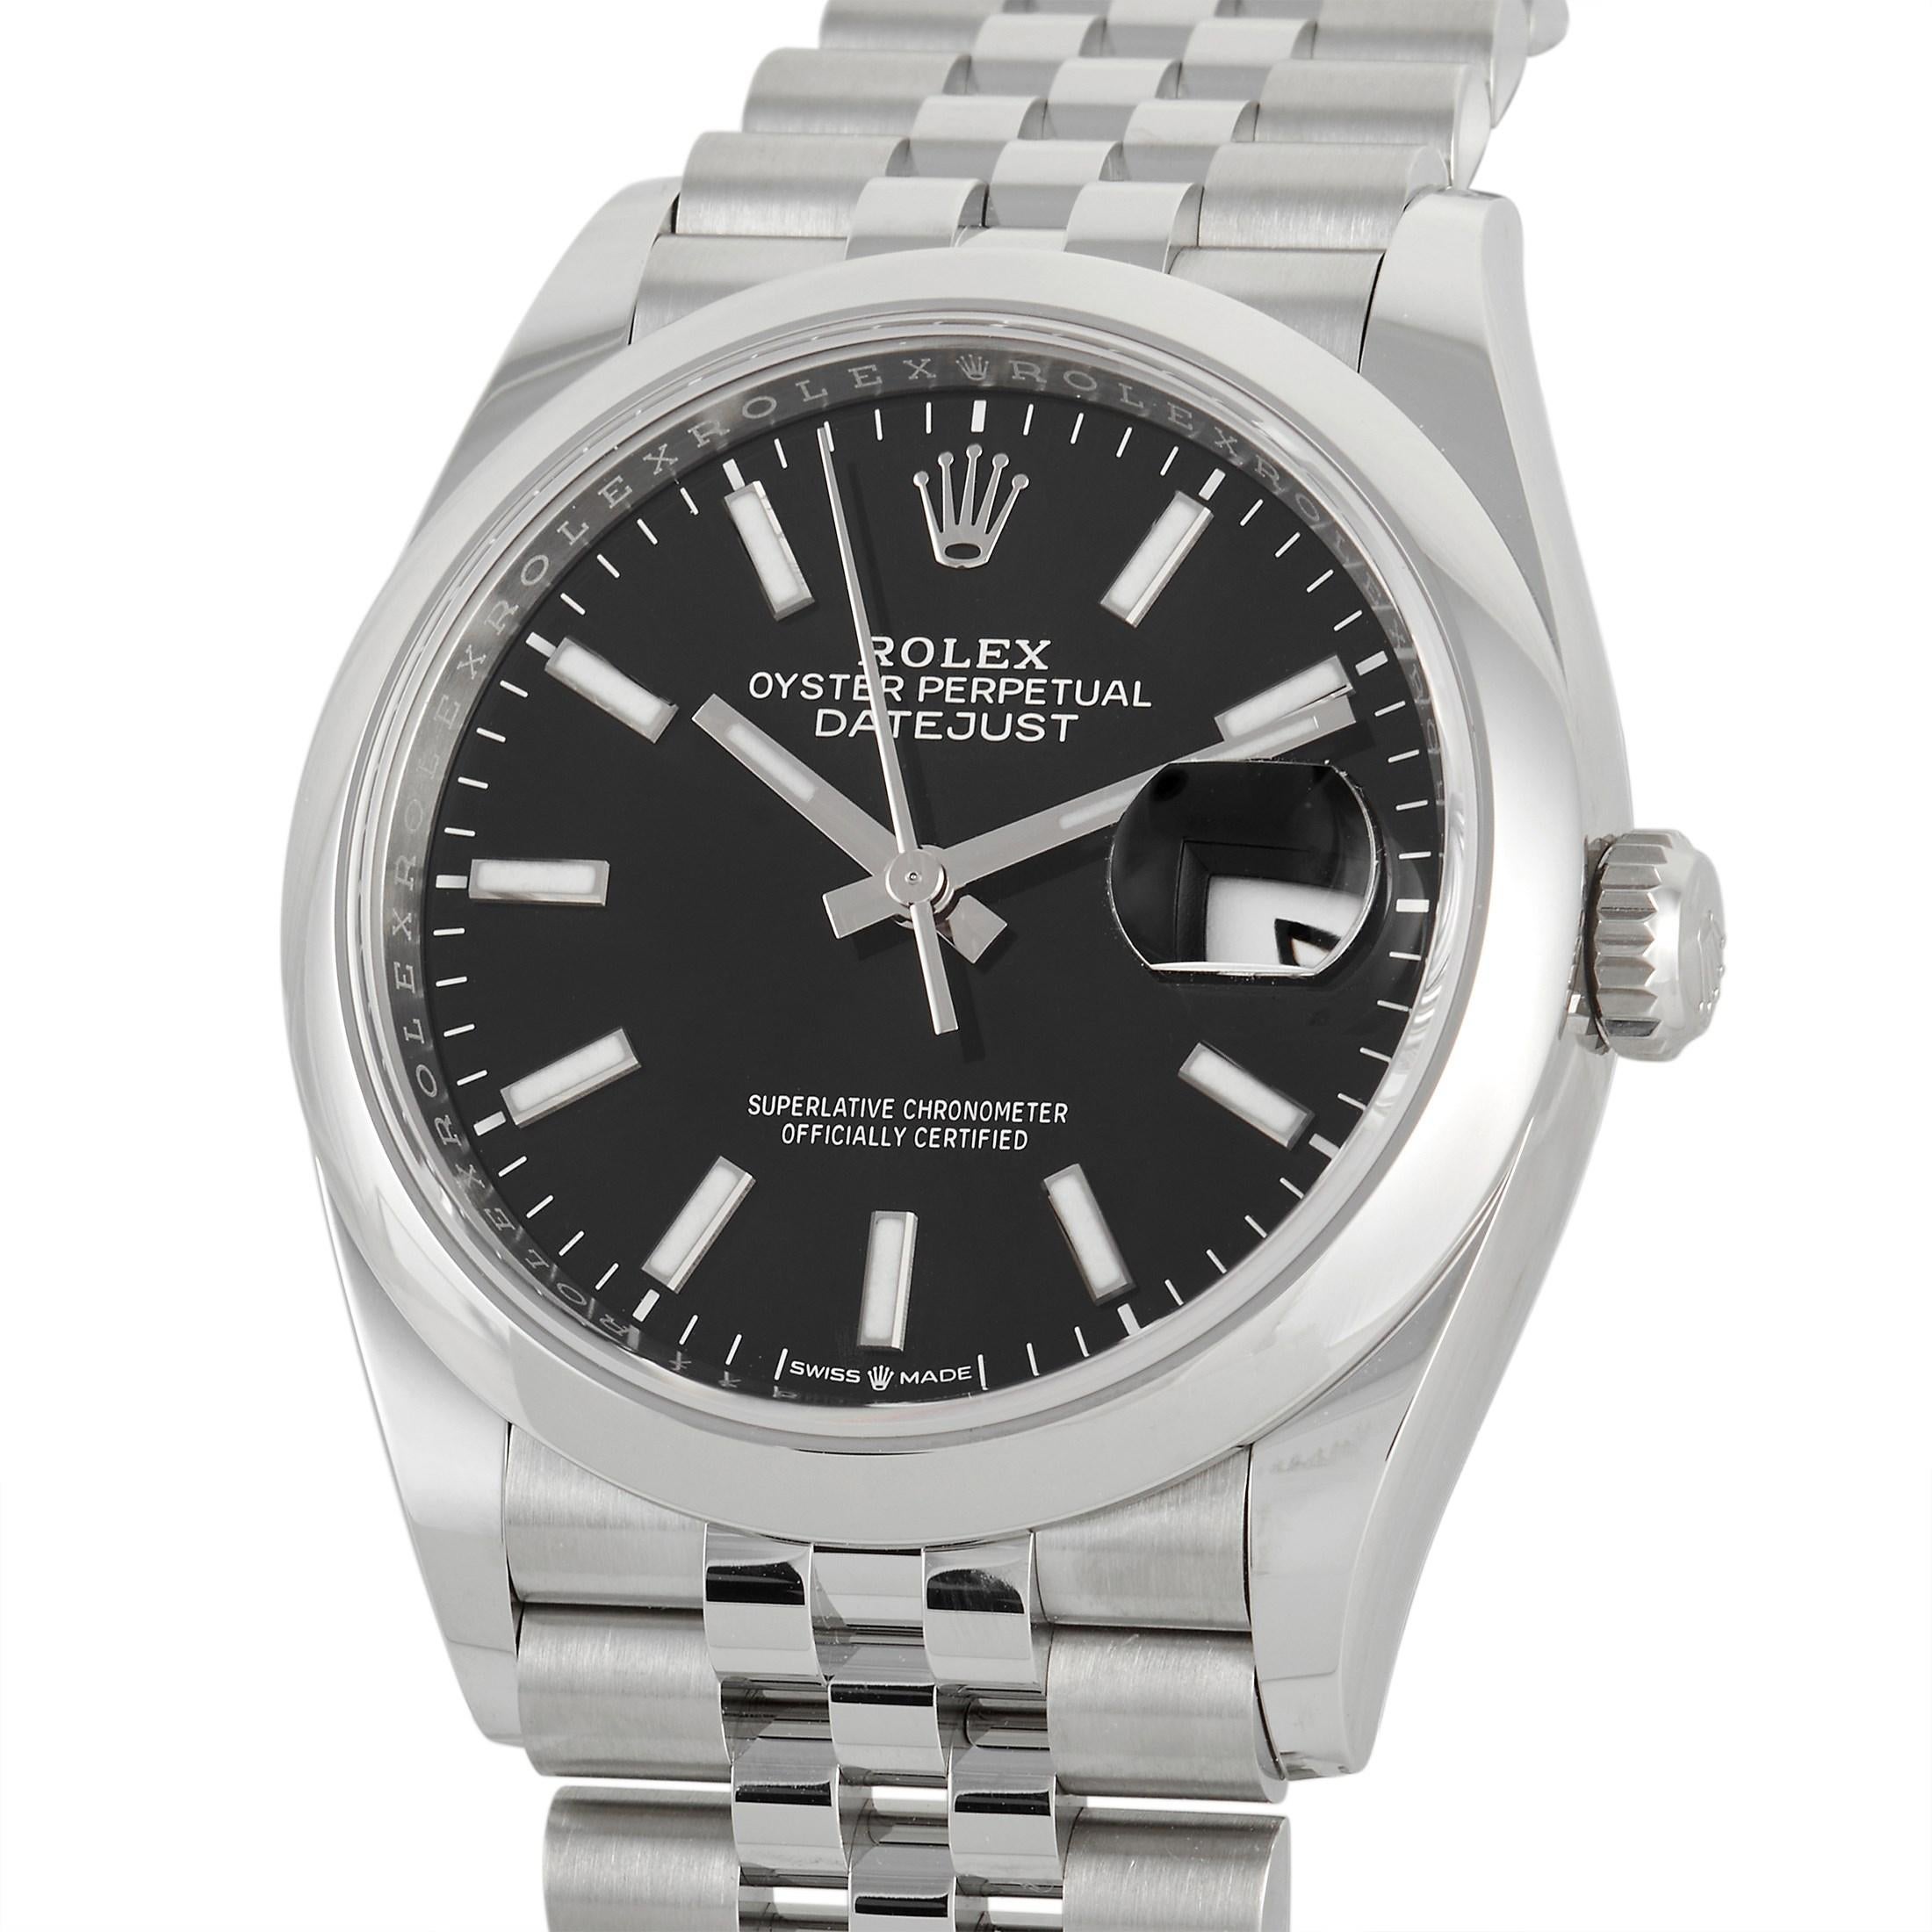 The Rolex Datejust Watch, reference number 126200, is striking in its simplicity. 

This luxury timepiece is sleek, streamlined, and inherently sophisticated. Crafted from Stainless Steel, the round 36mm case perfectly showcases the minimalist black